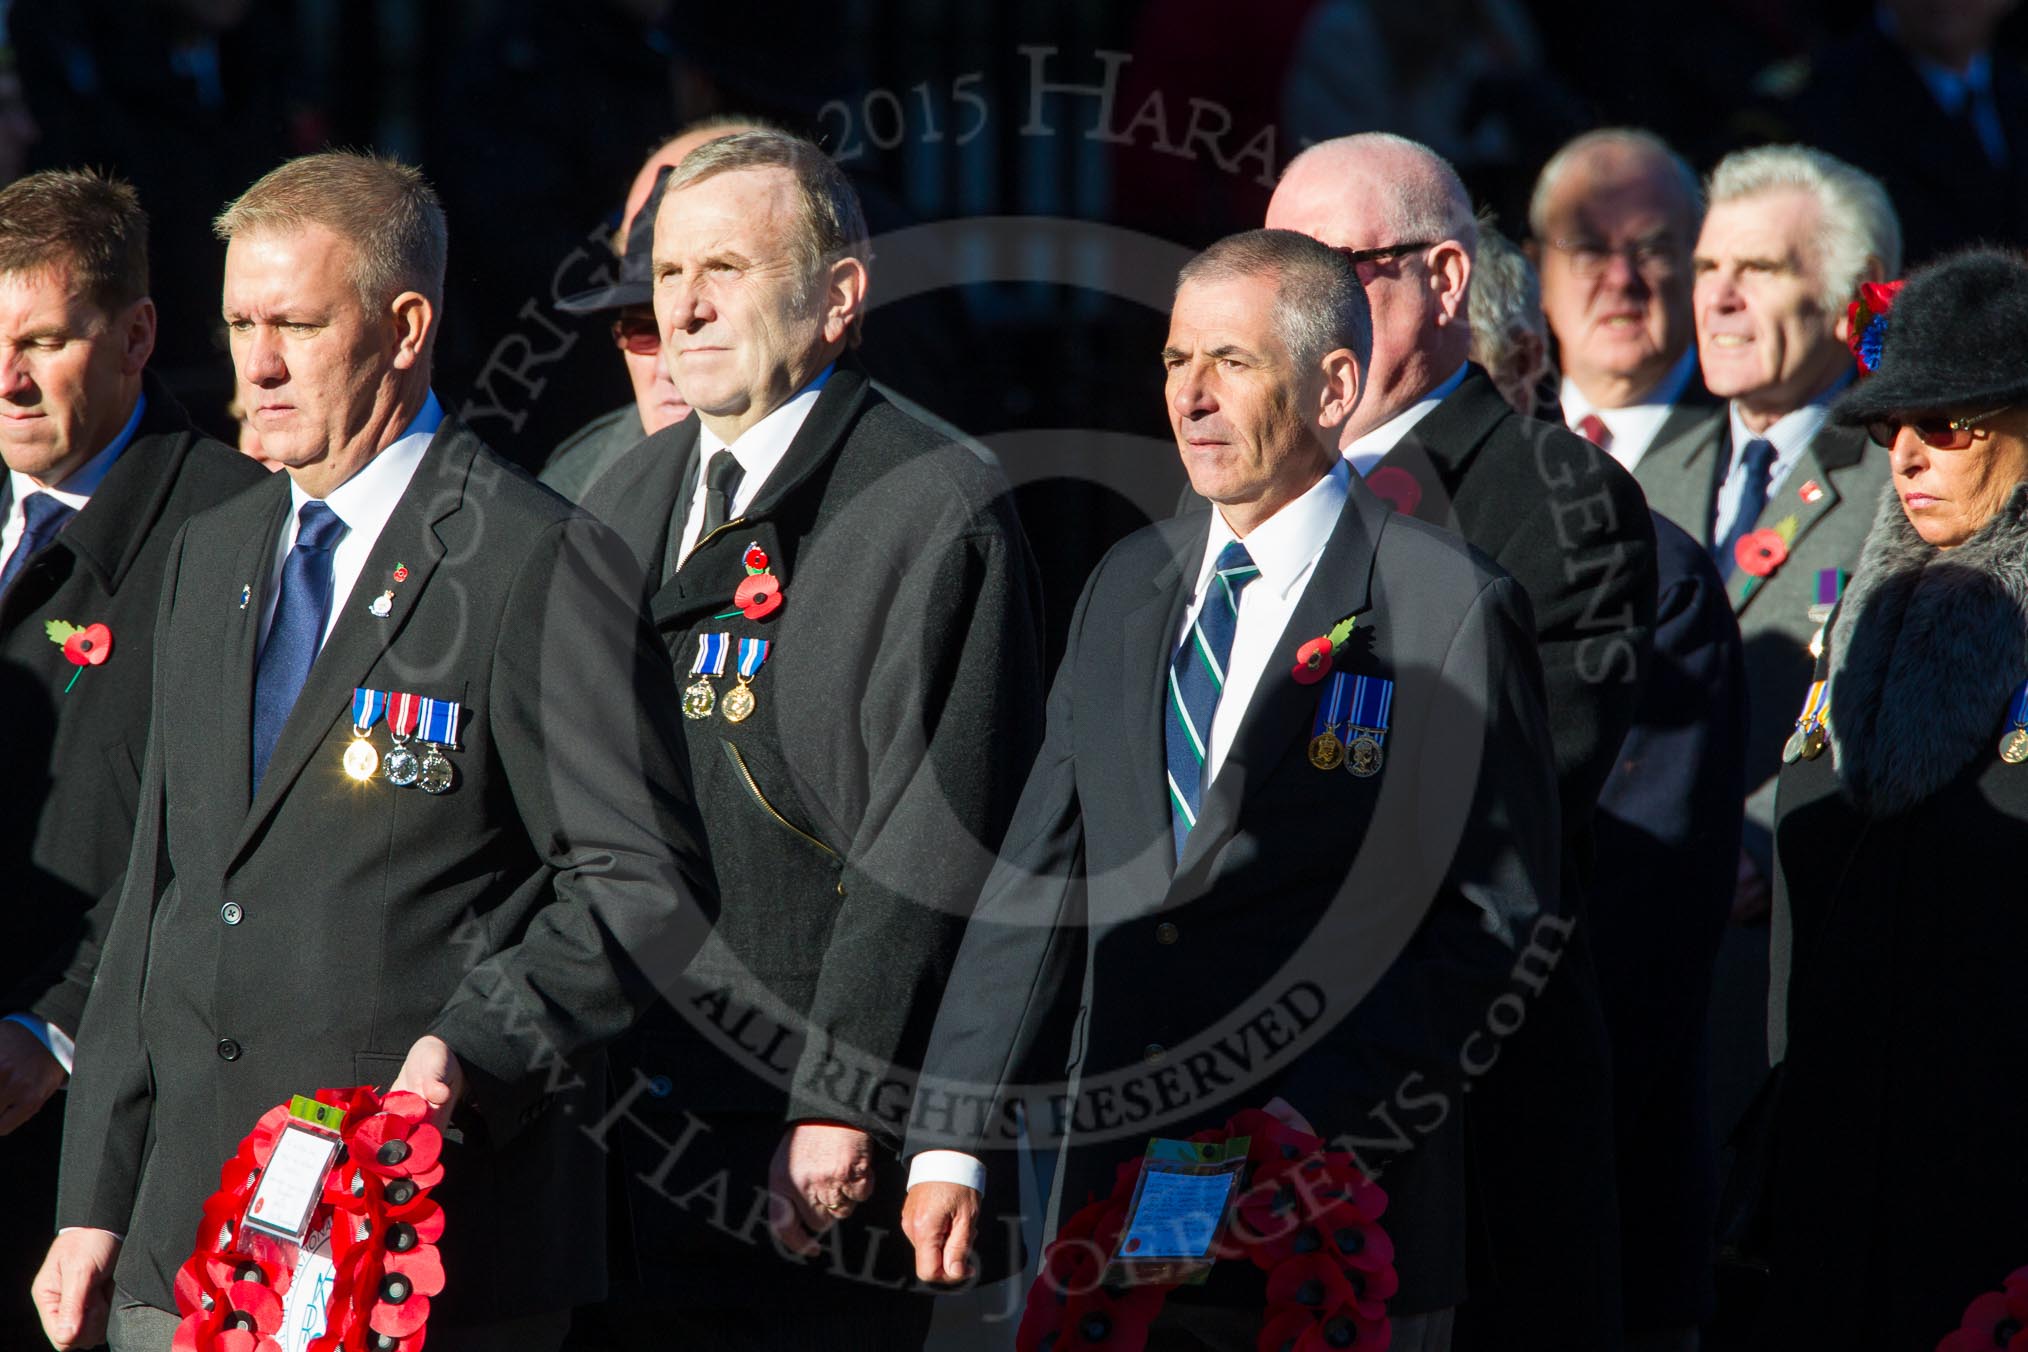 Remembrance Sunday Cenotaph March Past 2013: M12 - National Association of Retired Police Officers..
Press stand opposite the Foreign Office building, Whitehall, London SW1,
London,
Greater London,
United Kingdom,
on 10 November 2013 at 12:10, image #1948